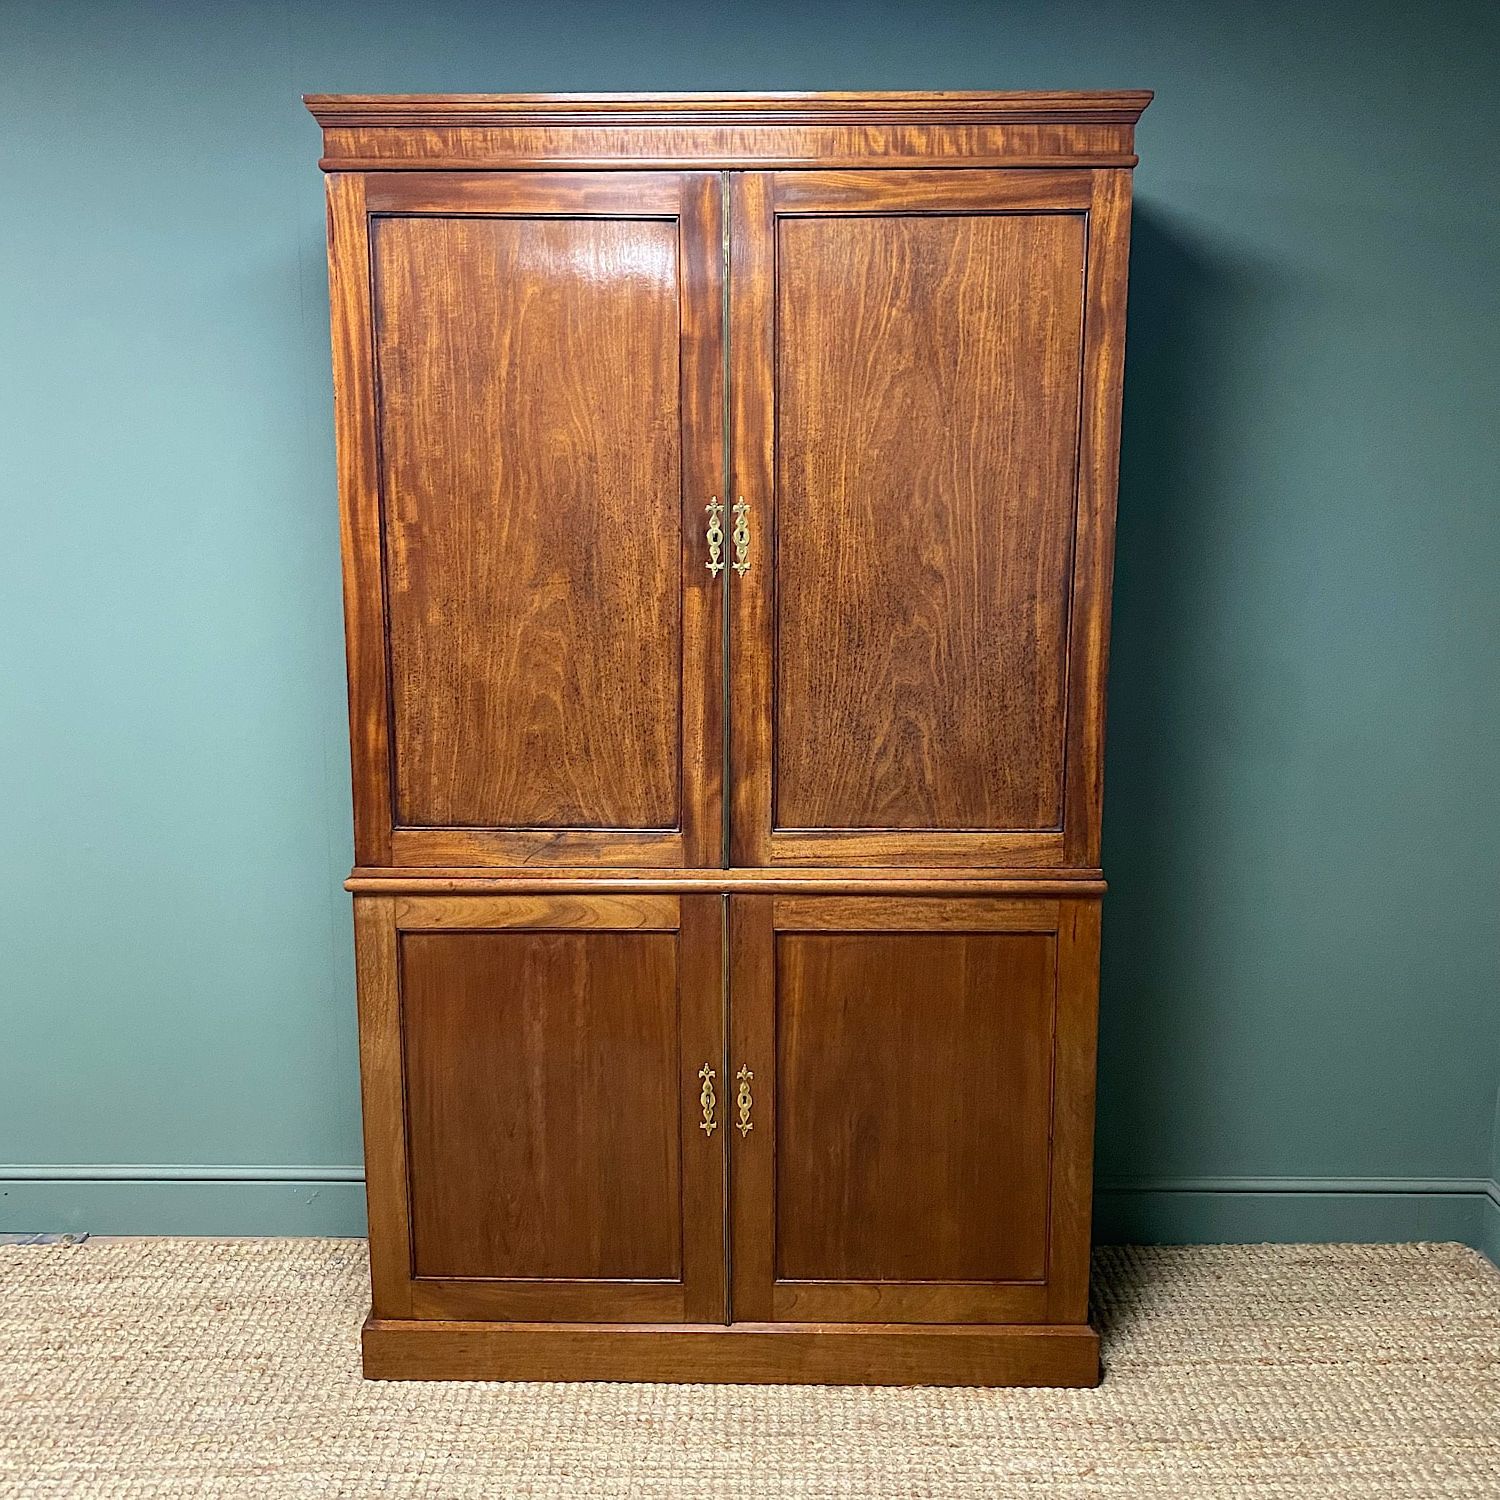 Antique Wardrobes For Sale – Victorian, Georgian & Edwardian Within Antique Single Wardrobes (View 17 of 20)